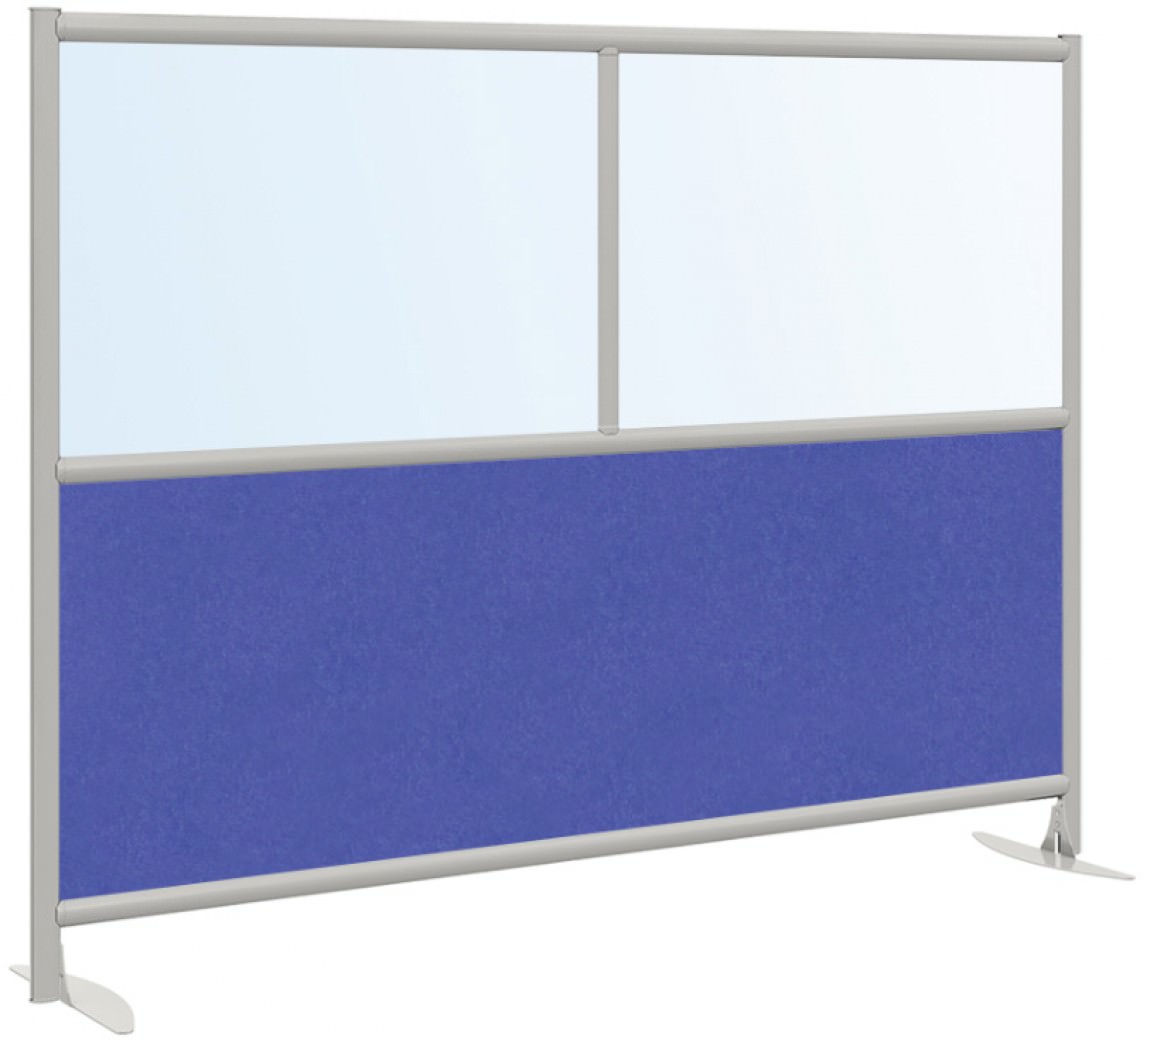 Free Standing Office Partition Panel - 73 x 54